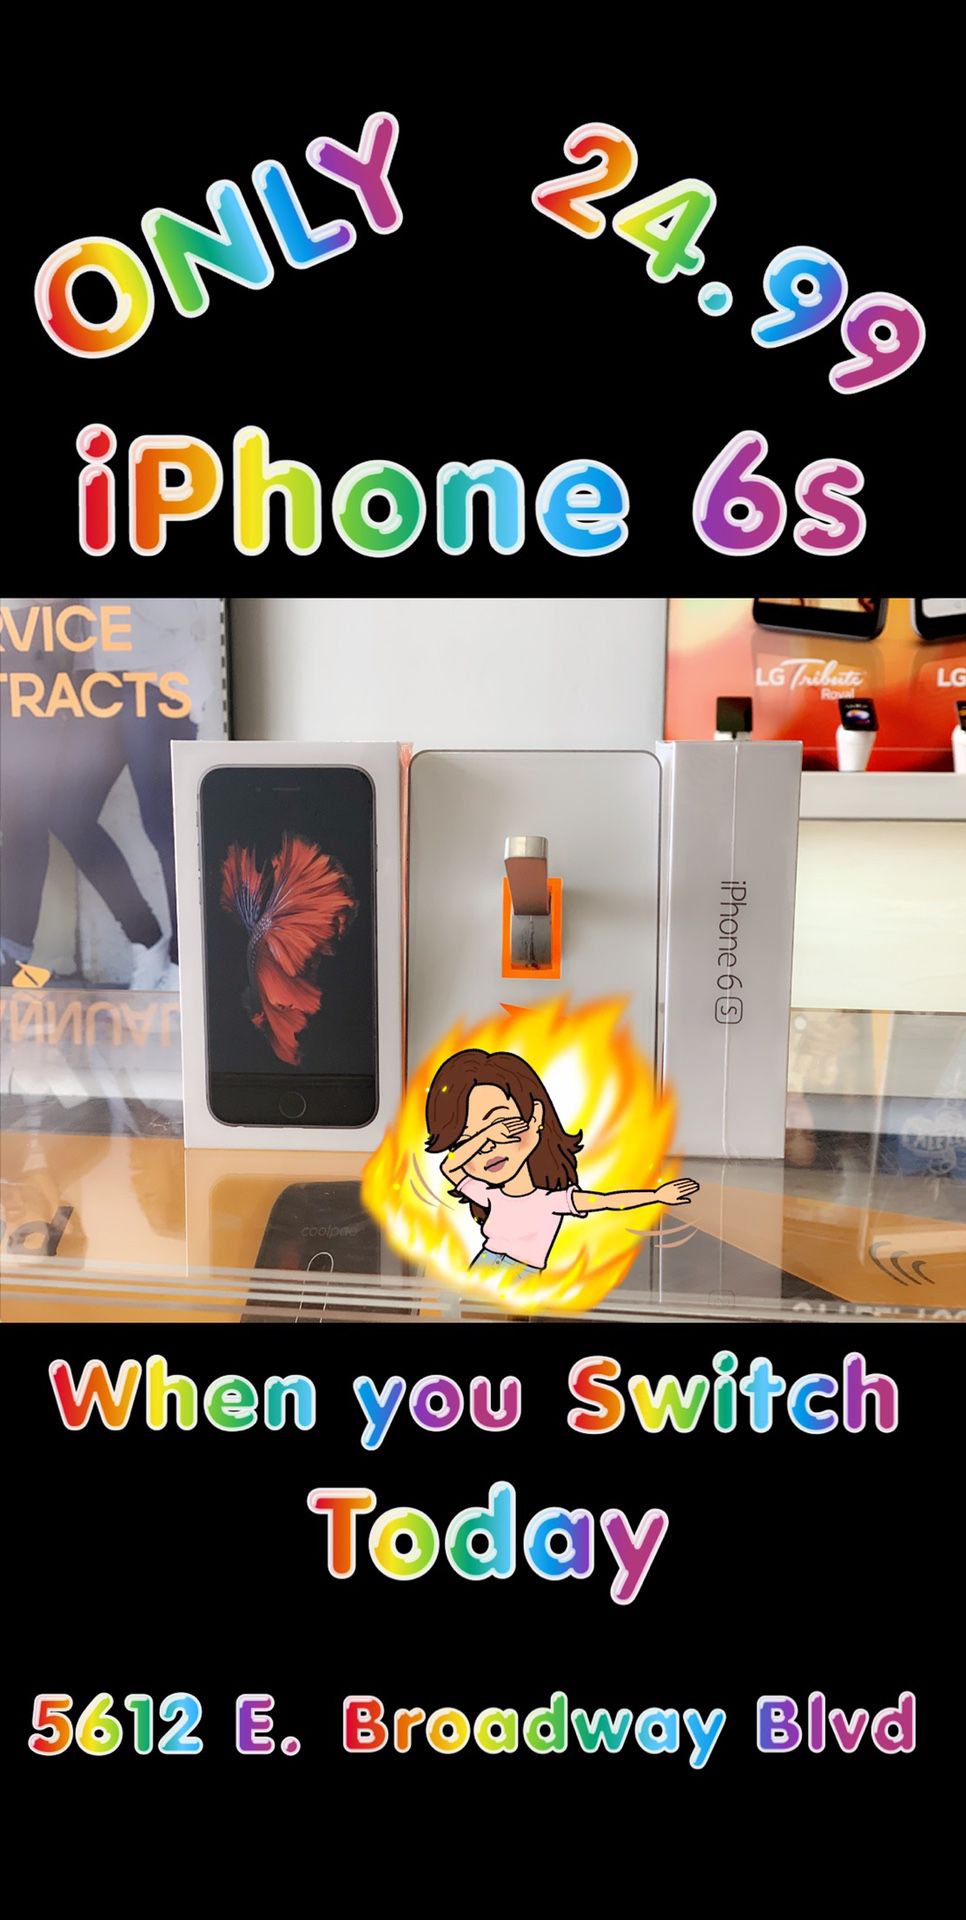 iPhone 6s Only 24.99